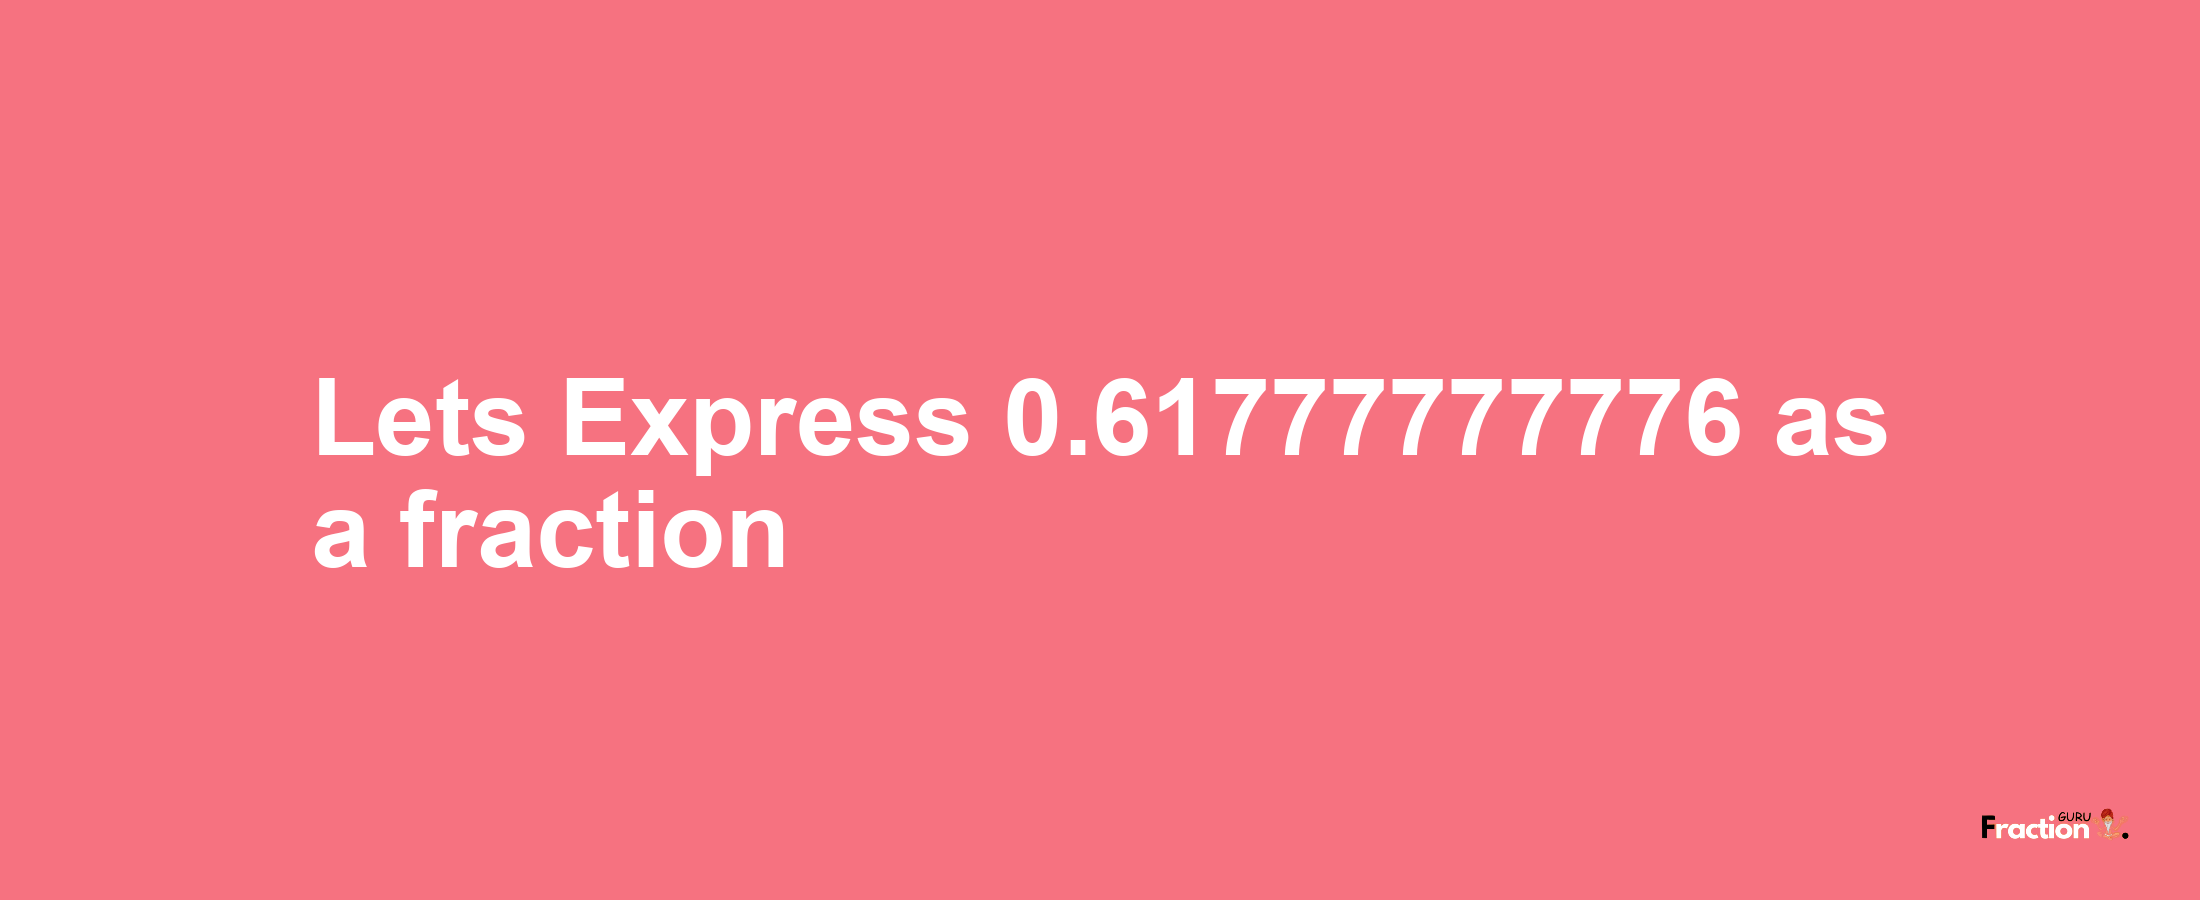 Lets Express 0.61777777776 as afraction